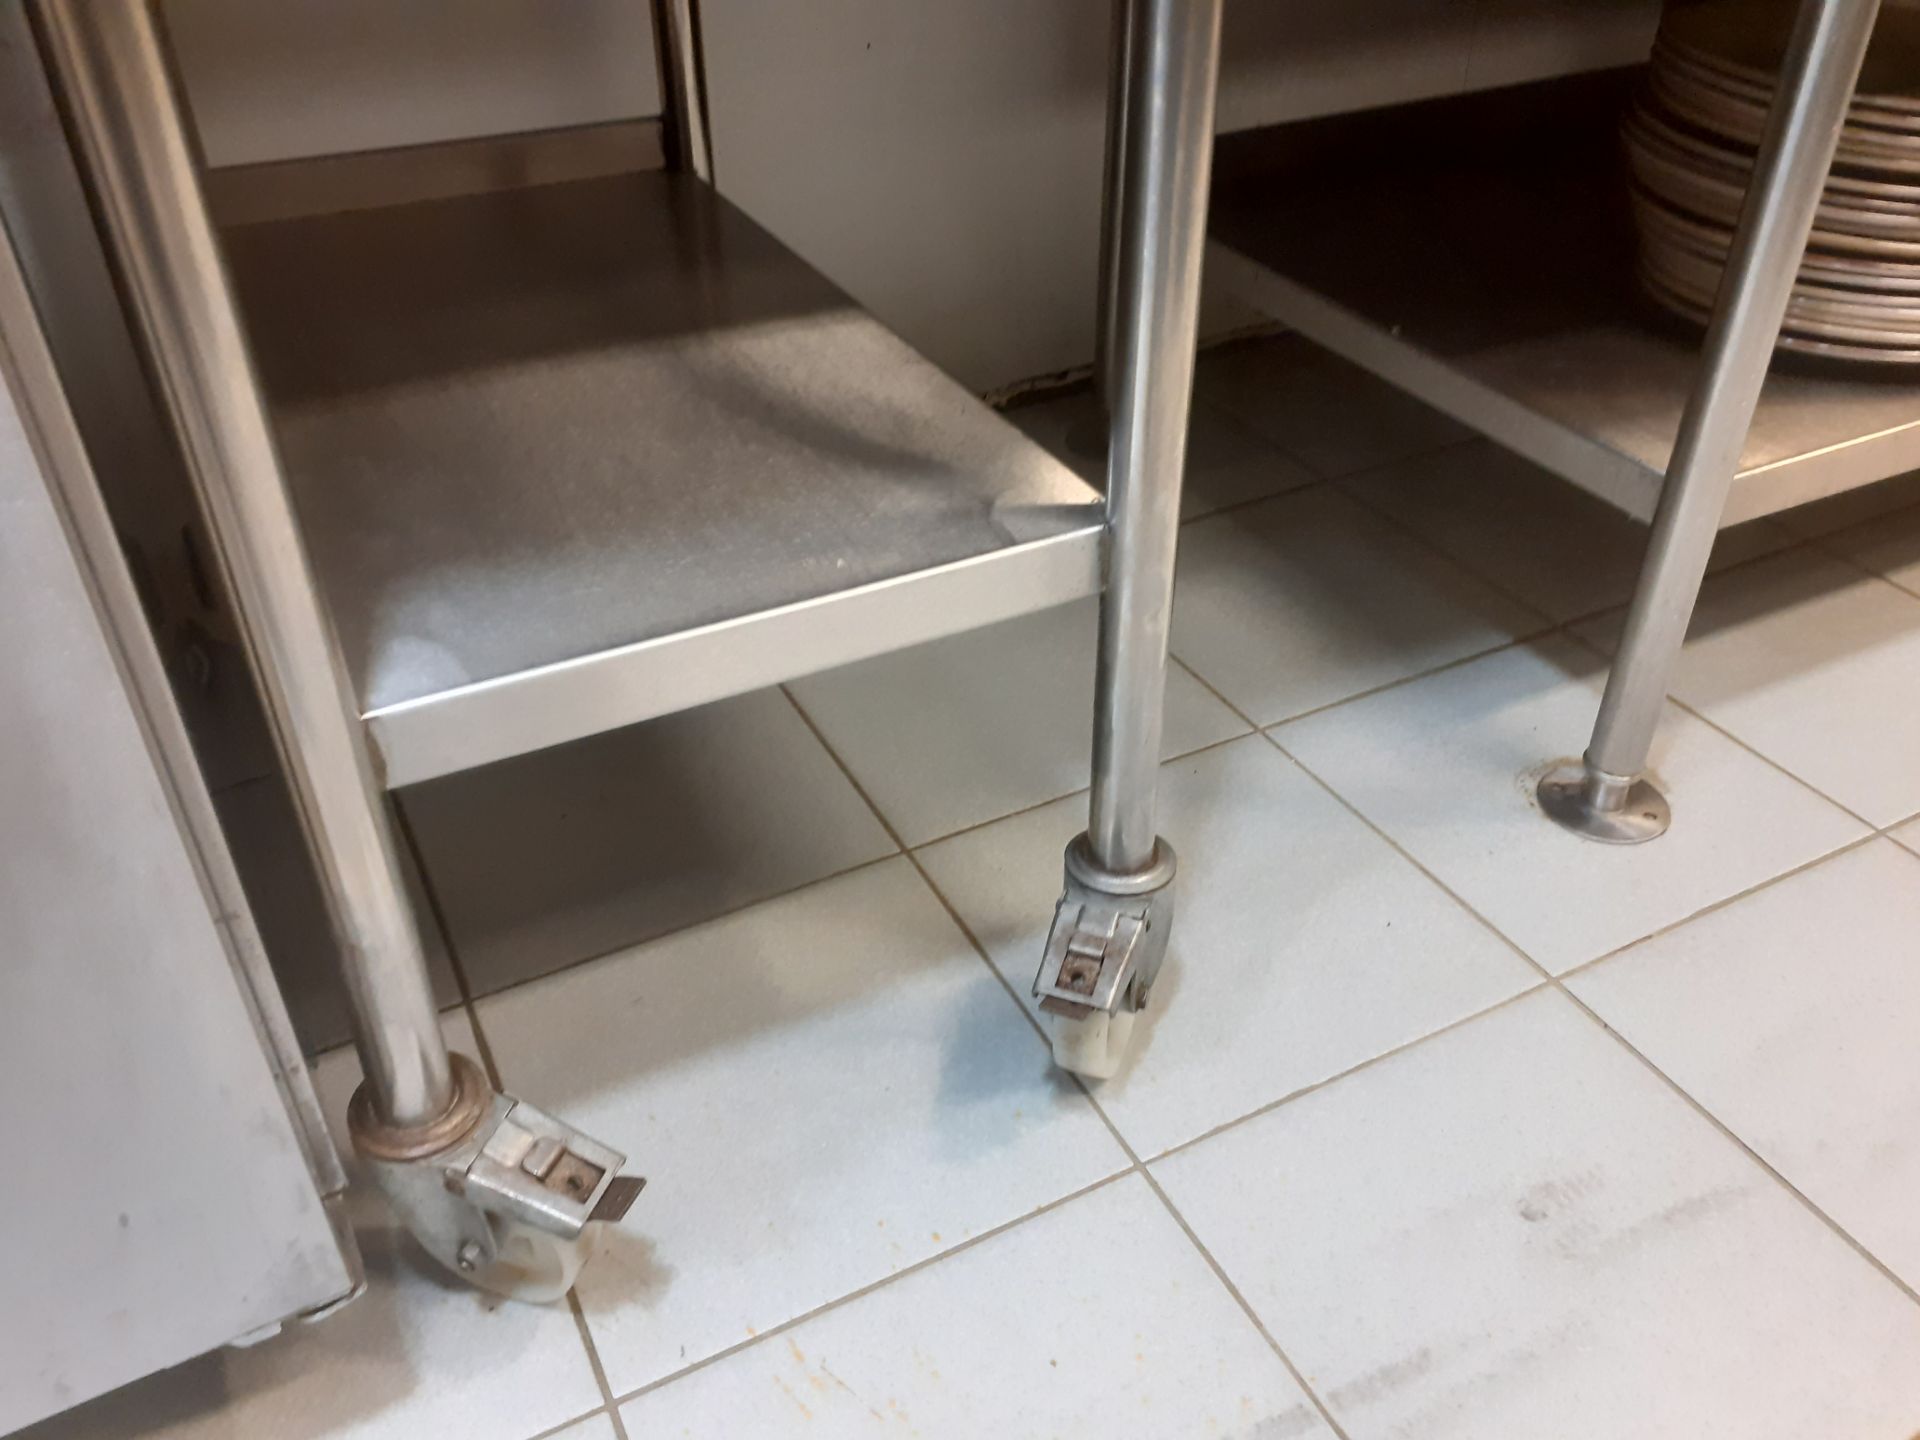 1 x Stainless Steel Prep Table With Undercounter and Castors - CL582 - Location: London EC4V - Image 4 of 4